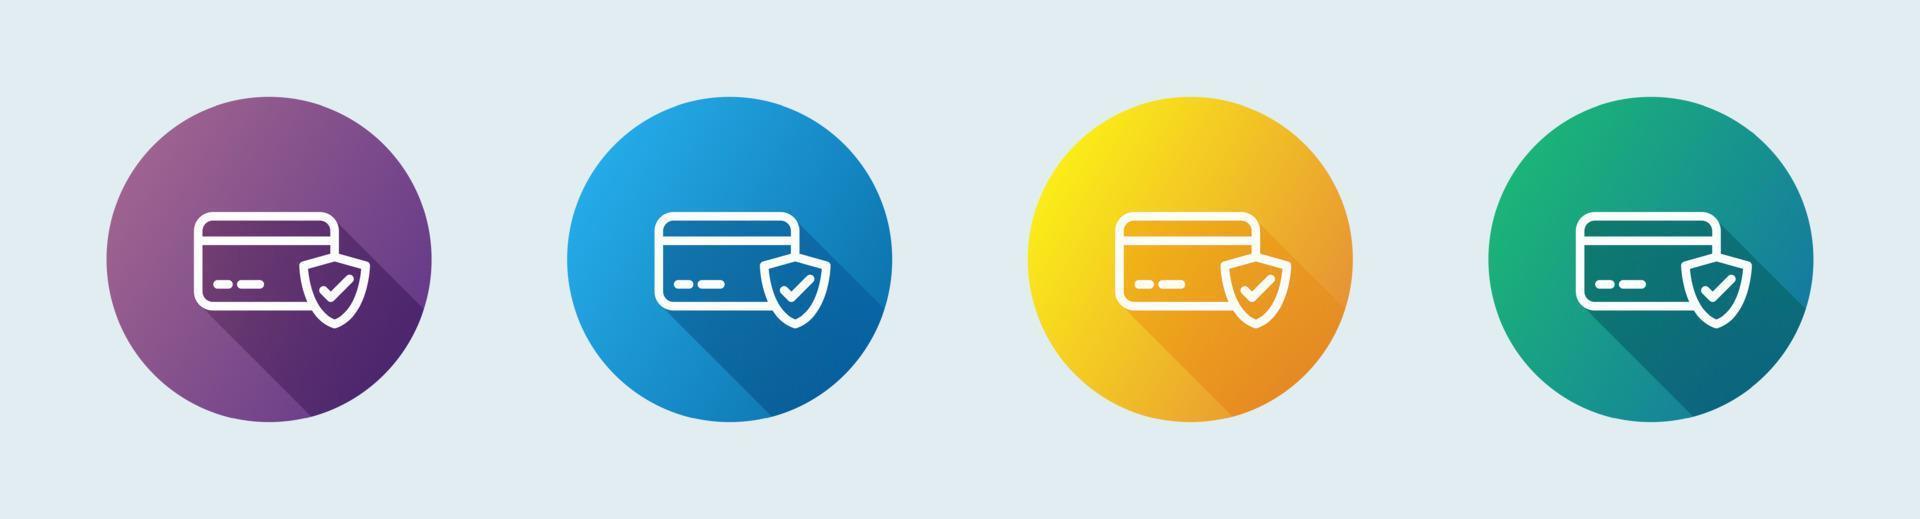 Payment done line icon in flat design style. Credit card signs vector illustration.